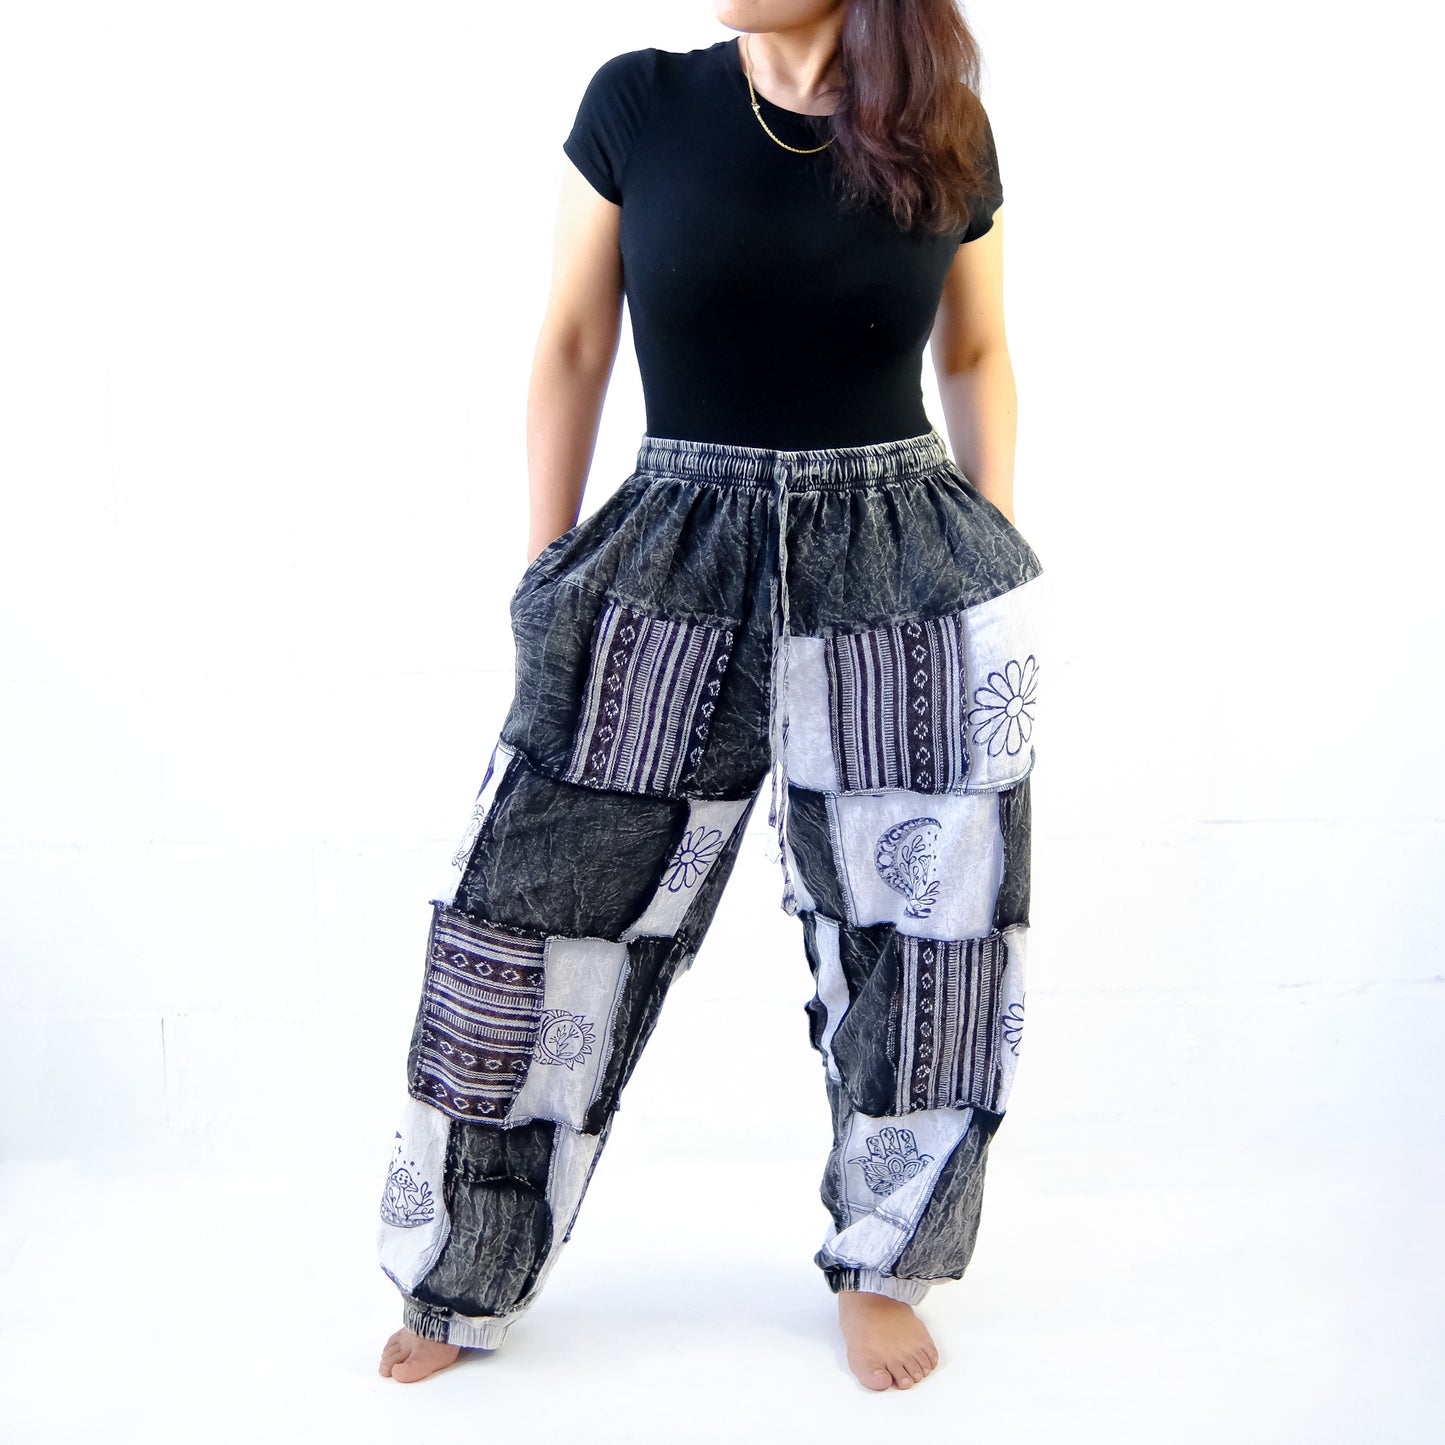 Earth tone Handwoven Patchwork Joggers